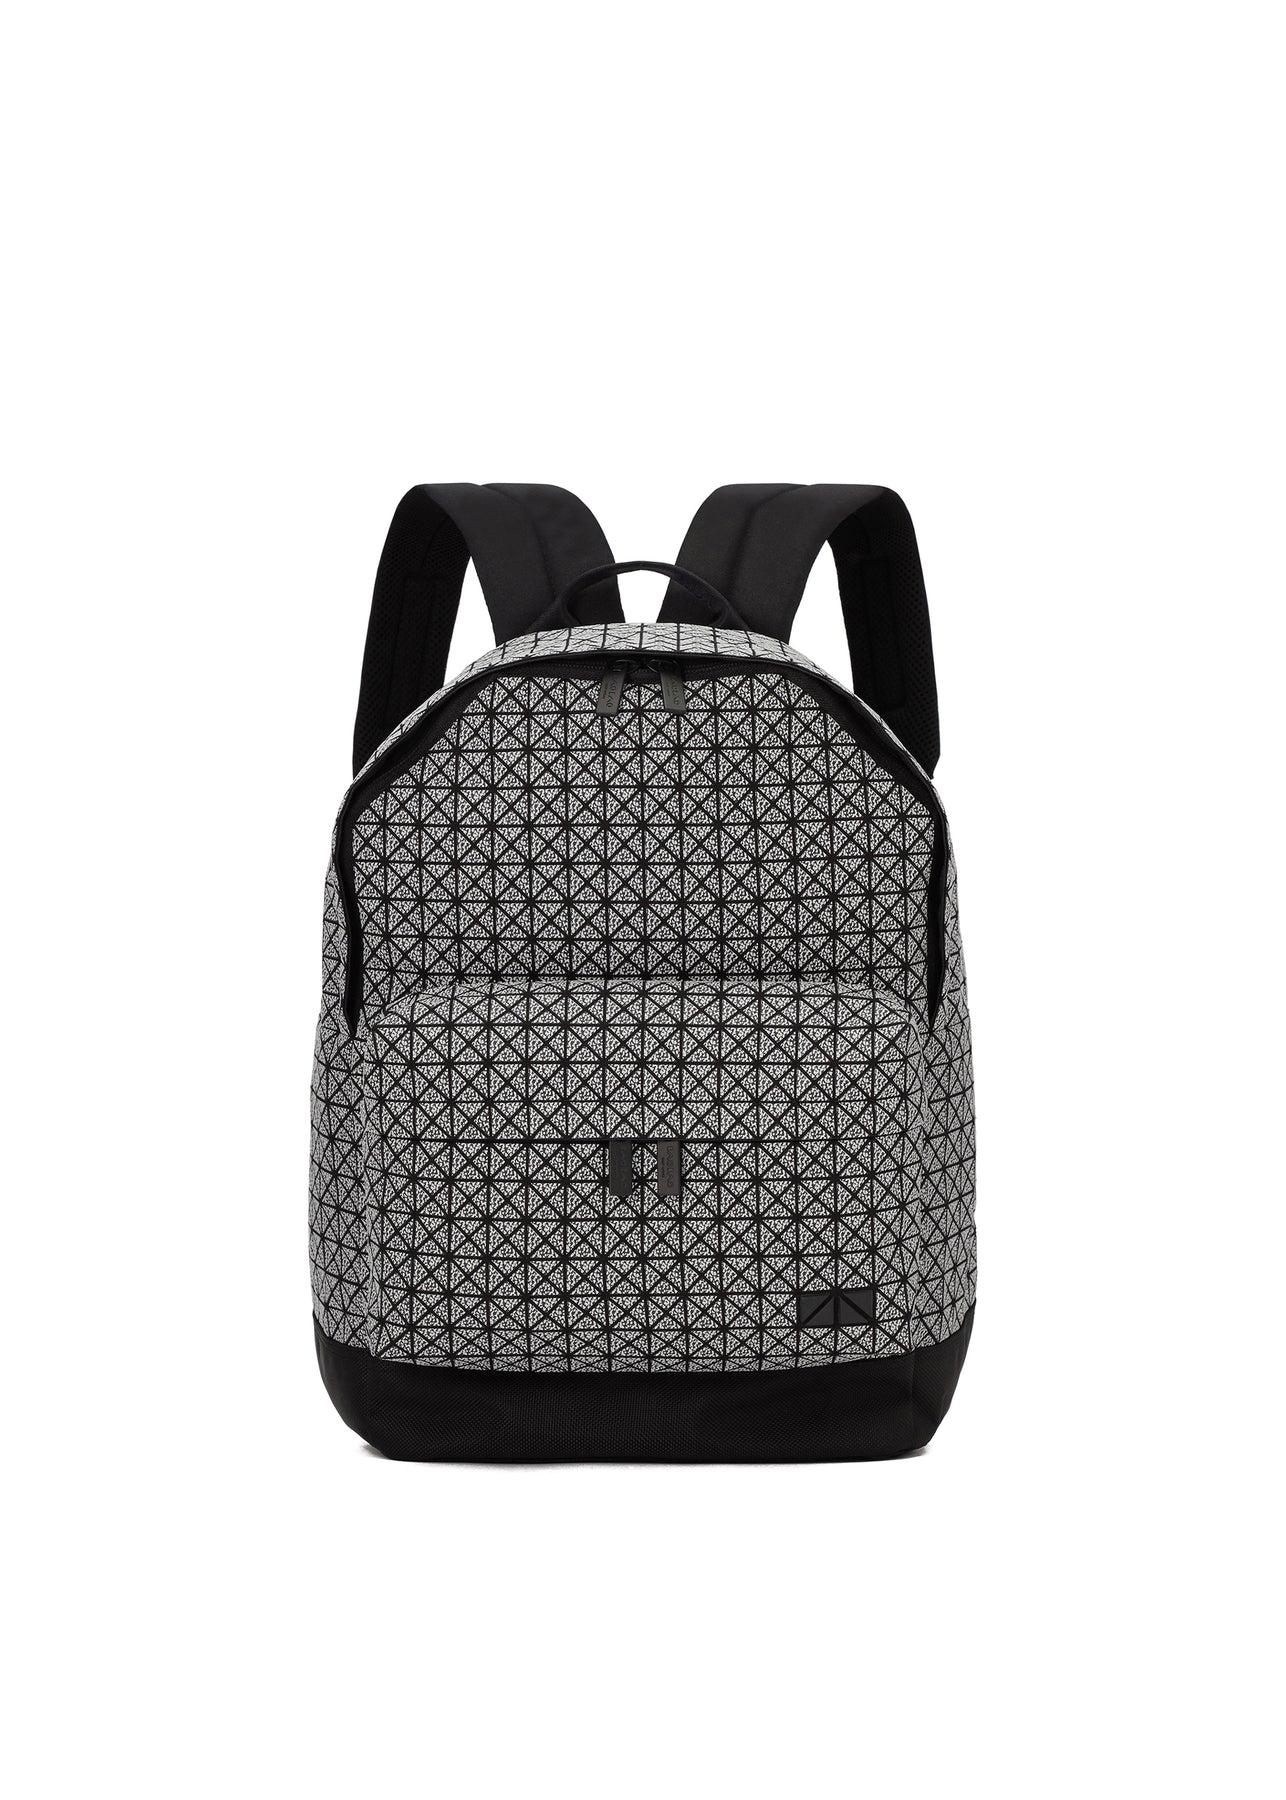 DAYPACK BACKPACK | The official ISSEY MIYAKE ONLINE STORE | ISSEY 